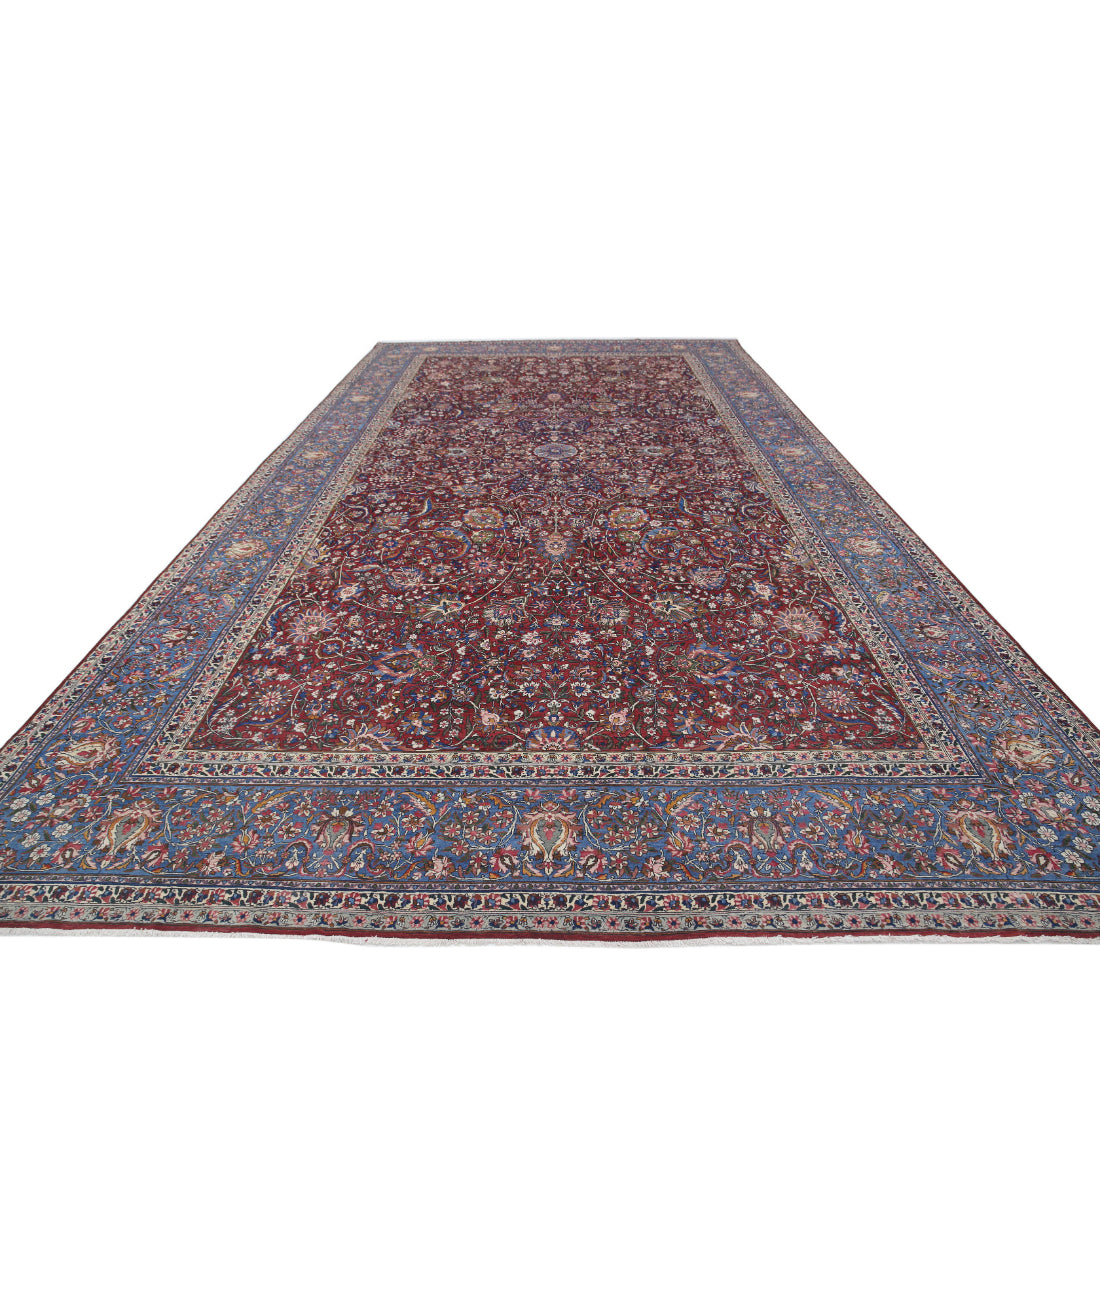 Hand Knotted Antique Masterpiece Persian Kerman Fine Wool Rug - 10'8'' x 20'2'' 10'8'' x 20'2'' (320 X 605) / Burgundy / Blue